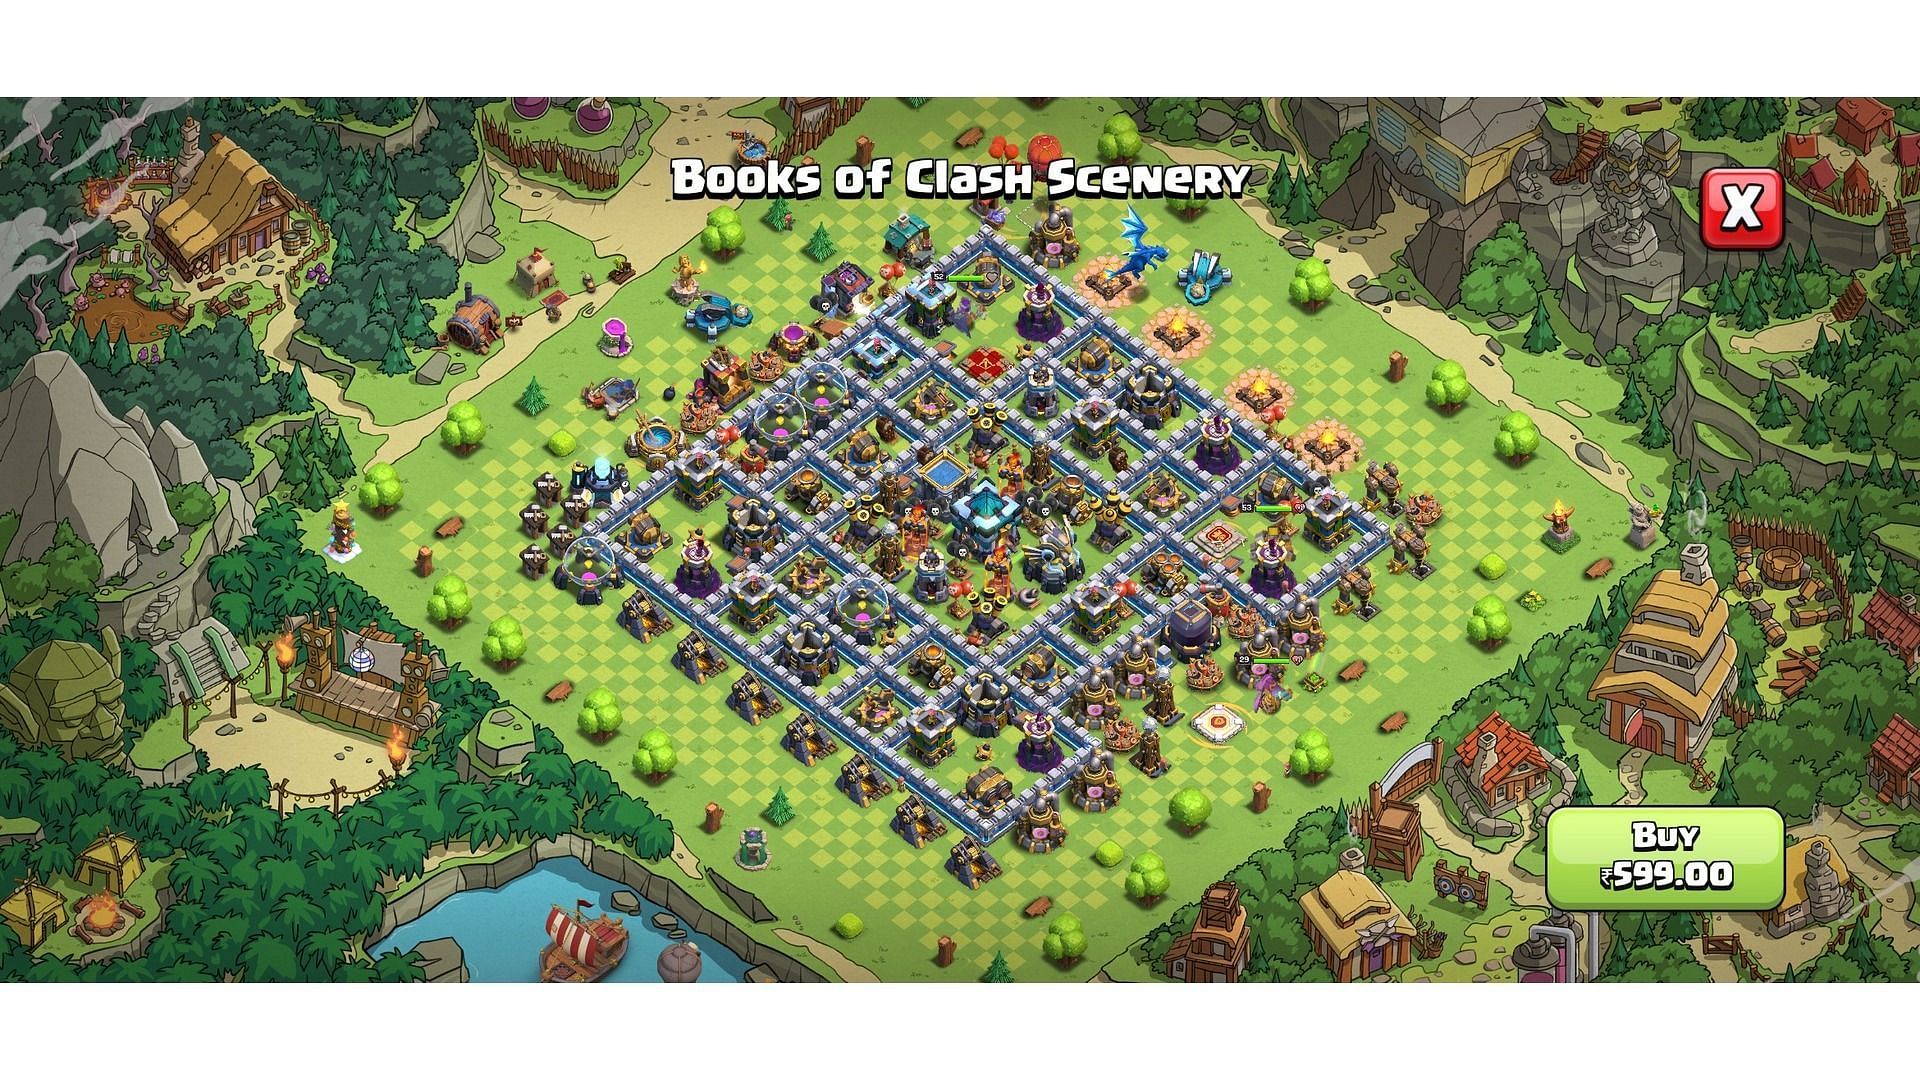 Book of Clash scenery (Image via Supercell)